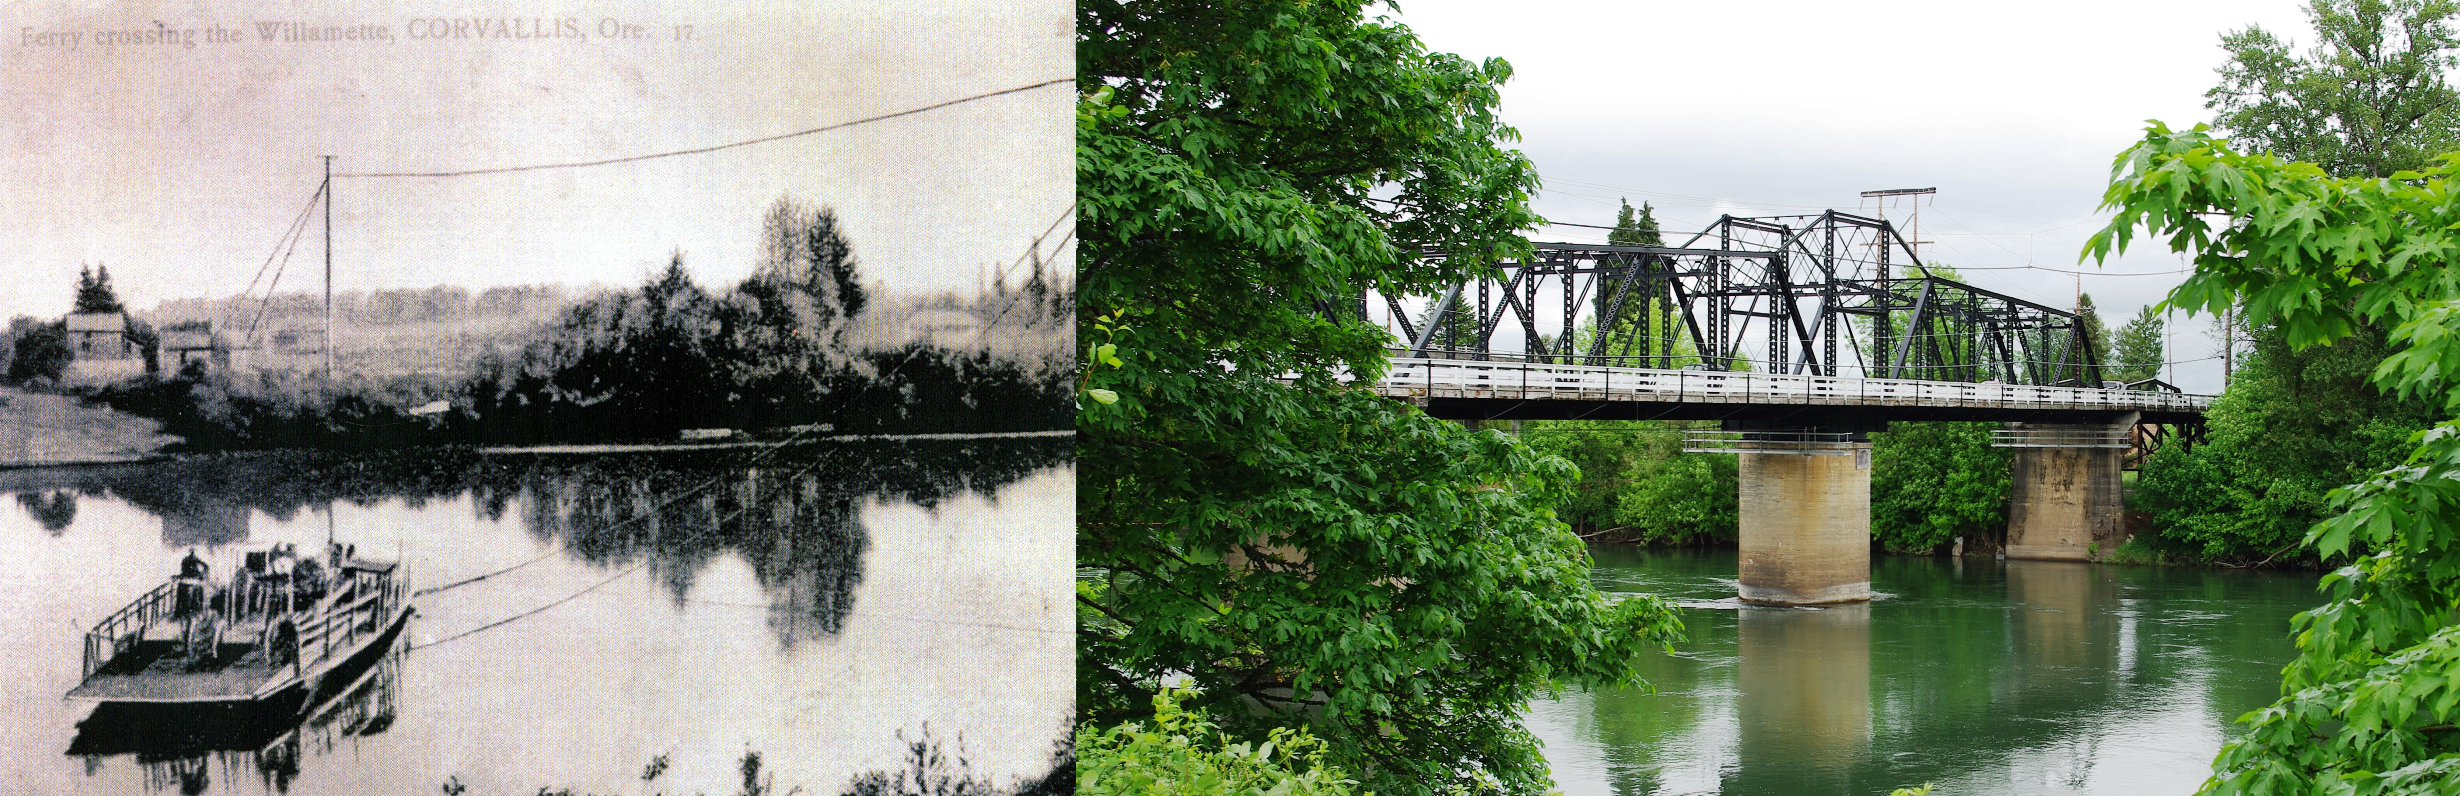 Two images, one black and white from the early 1900s of a ferry landing, one of the modern Van Buren bridge